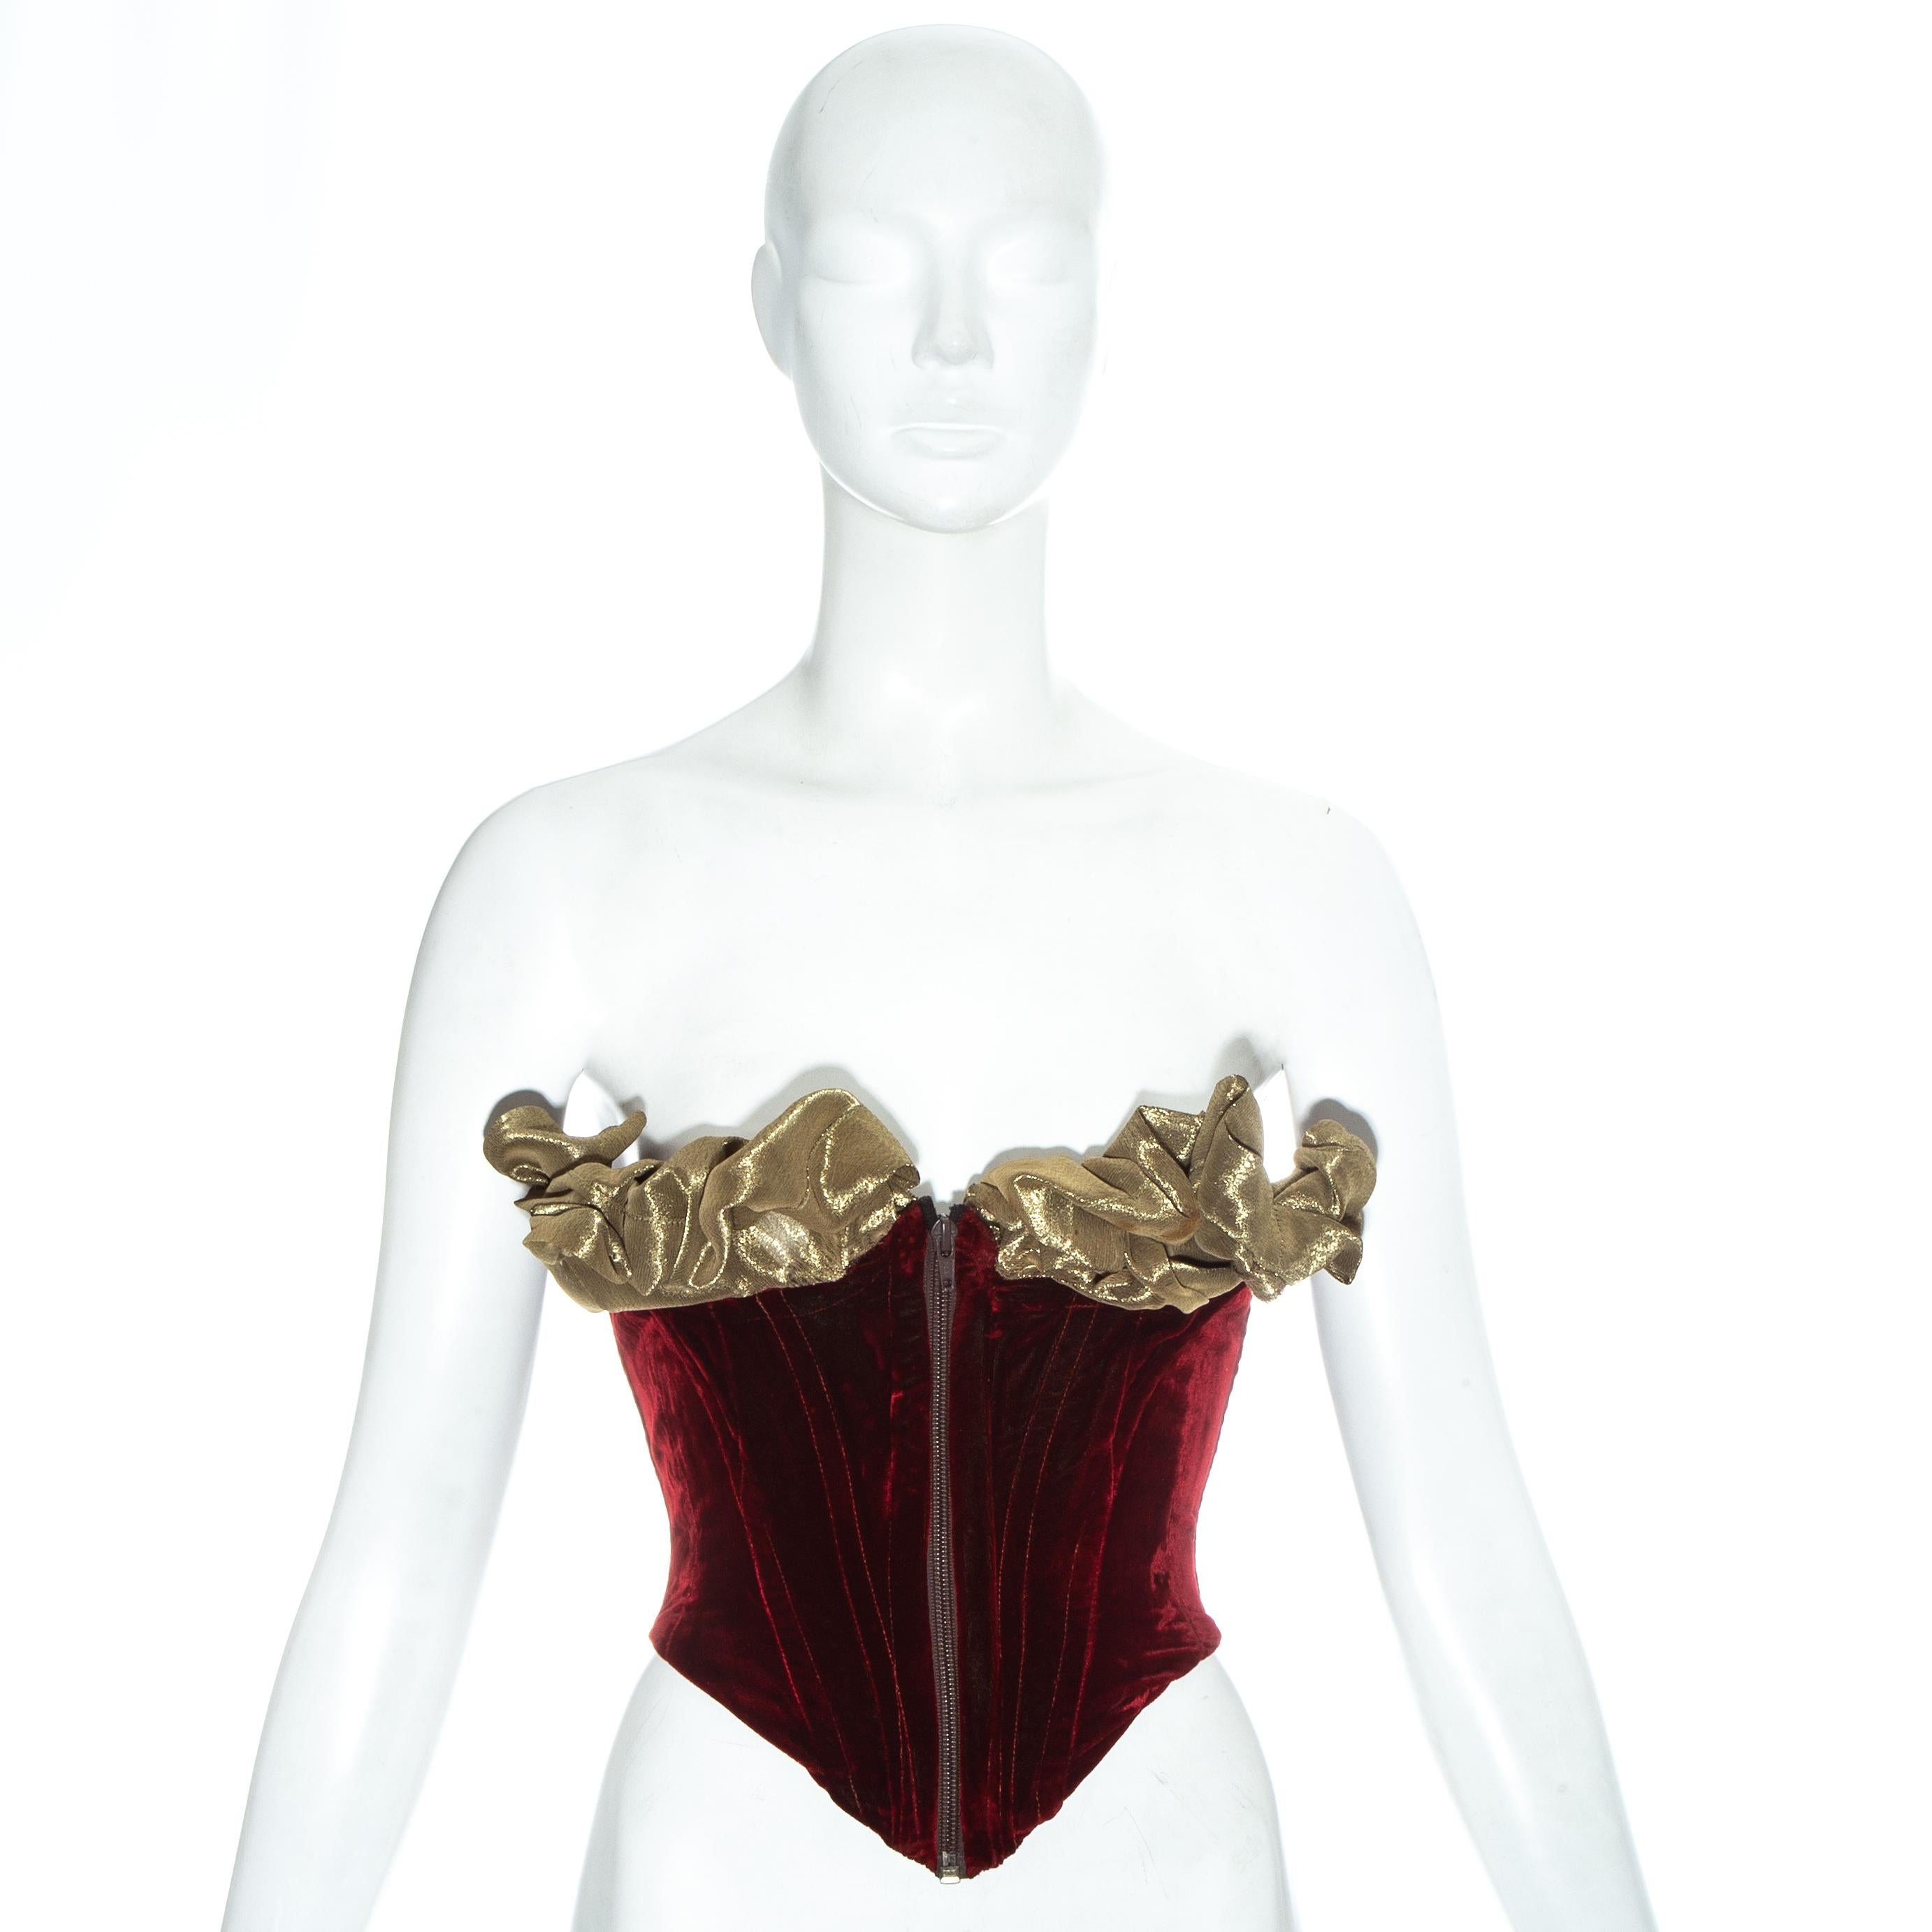 Vivienne Westwood 'Voyage to Cythera' red velvet bustier corset with olive lamé wired bust and front zip fastening. Designed to cinch the waist and push the breasts up.

Fall-Winter 1989